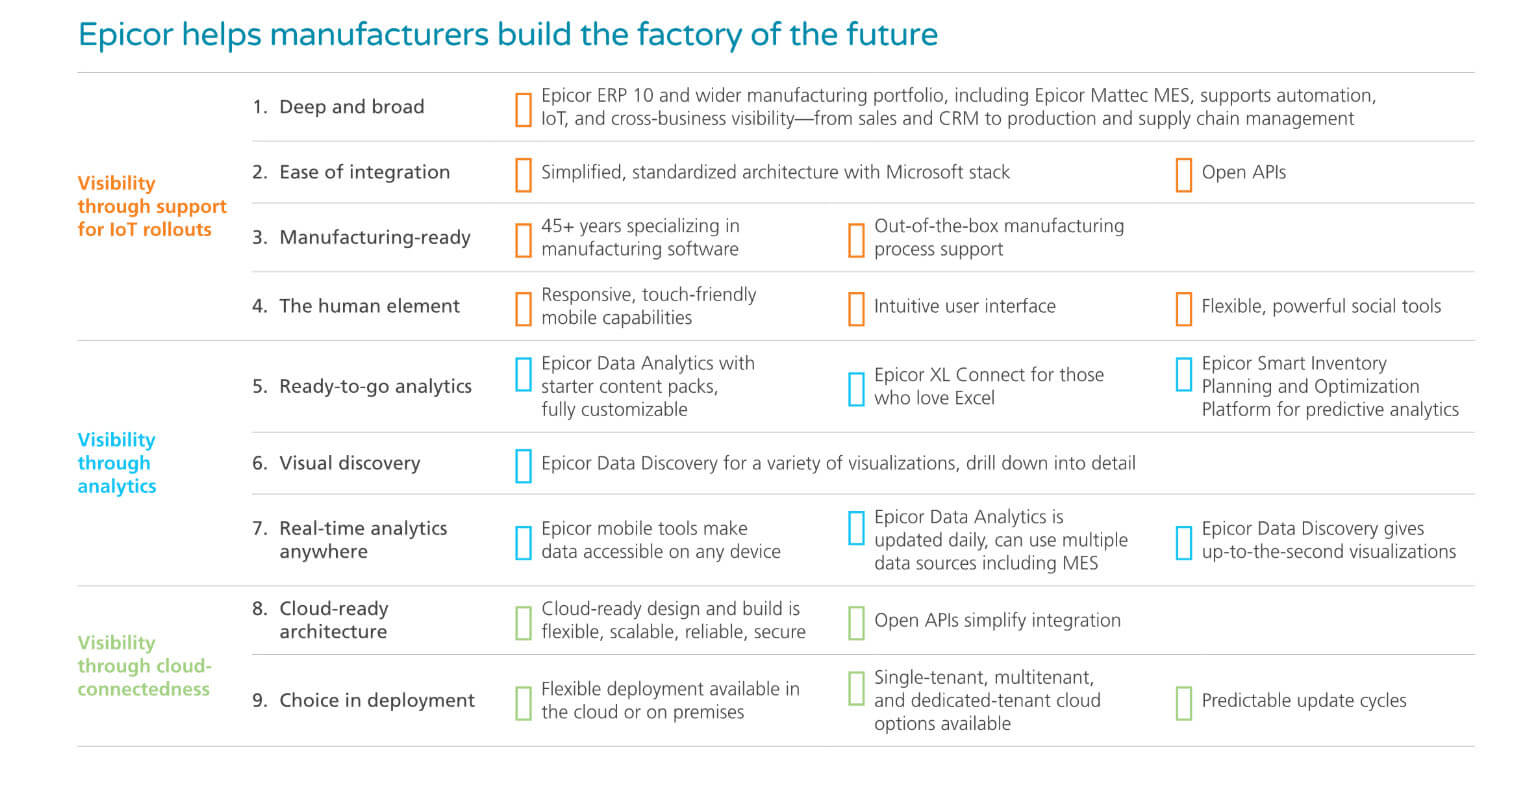 Epicor helps manufacturers build the factory of the future